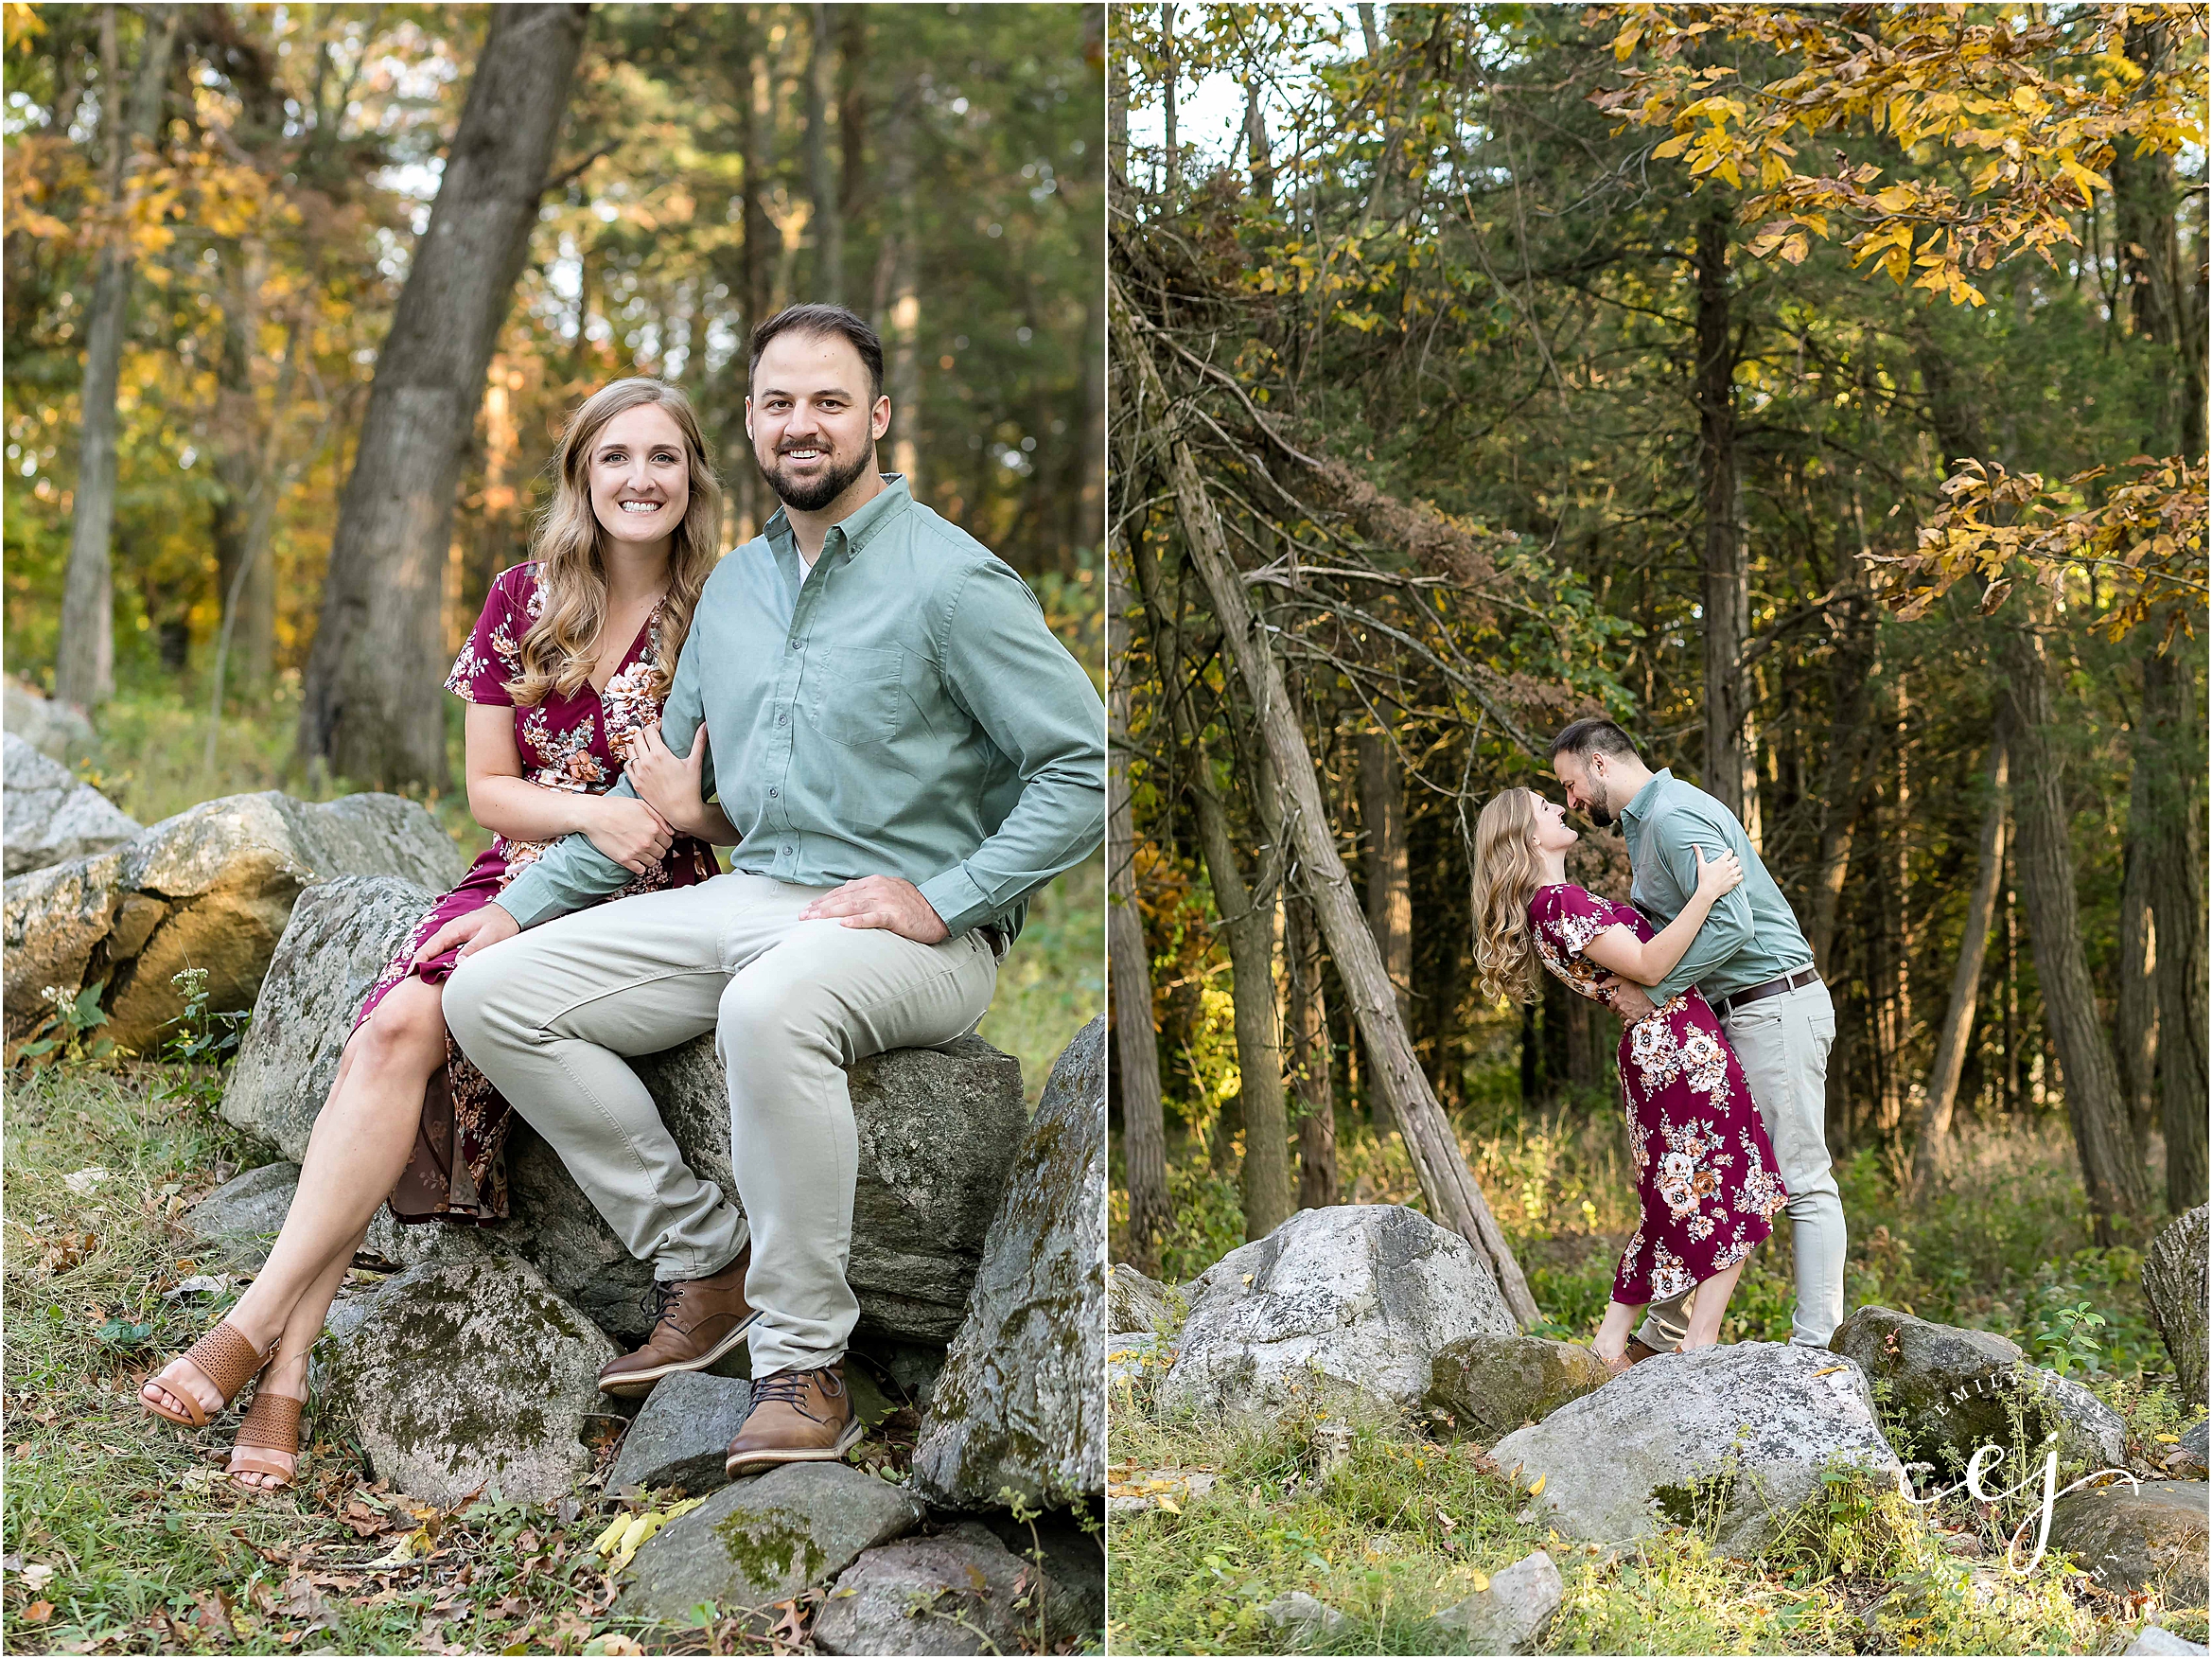 uw arboretum engagement session photographer wisconsin smiling at camera hugging large rocks standing and sitting